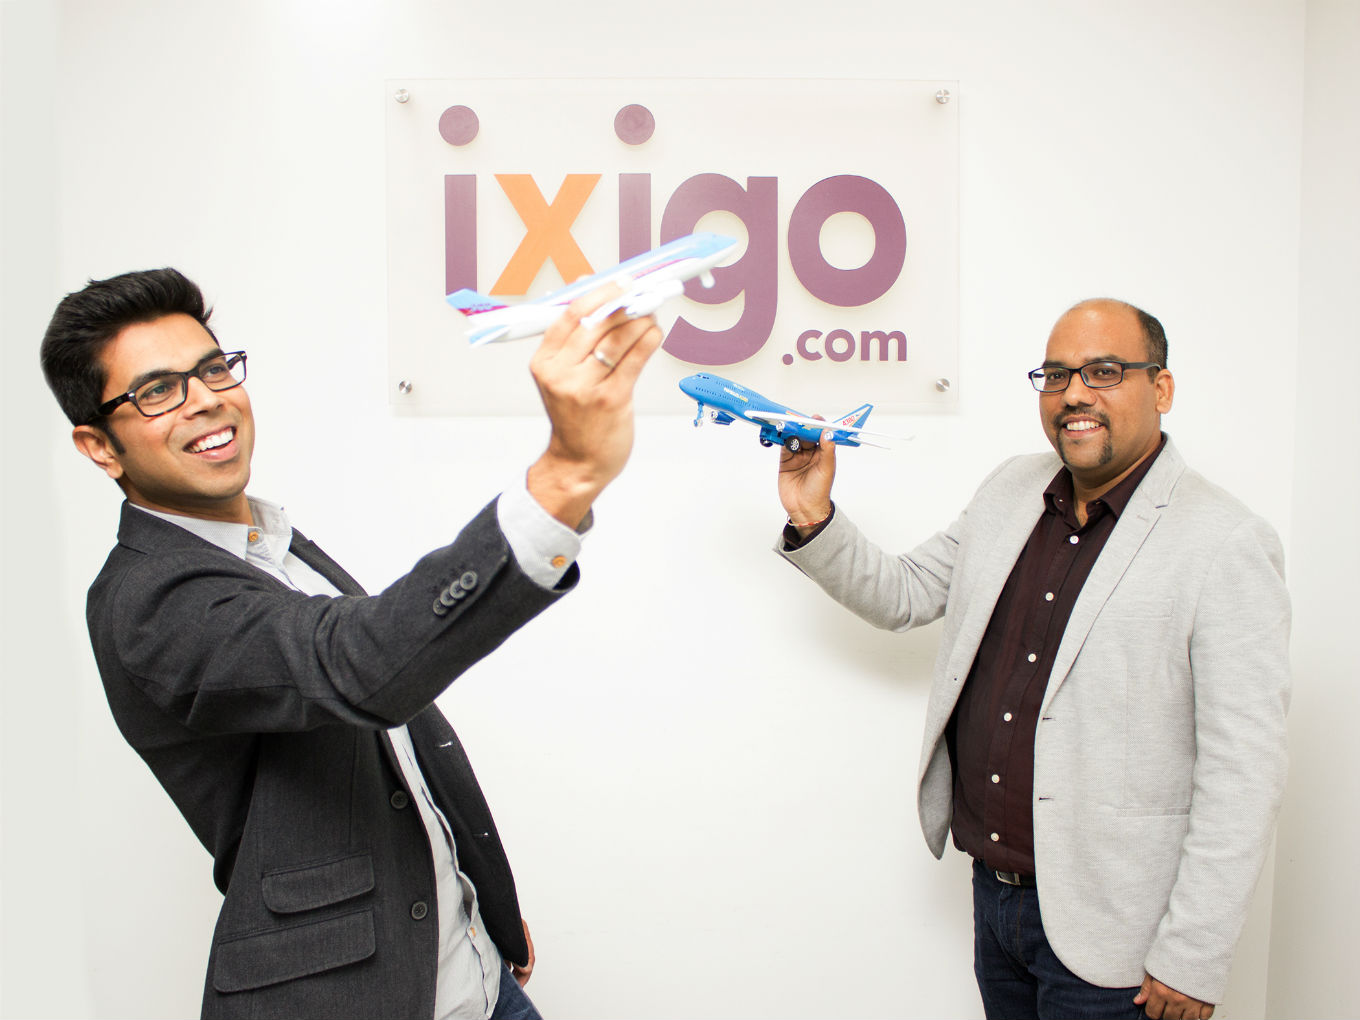 Exclusive: ixigo Expands Online Travel Services To Include Entertainment Content